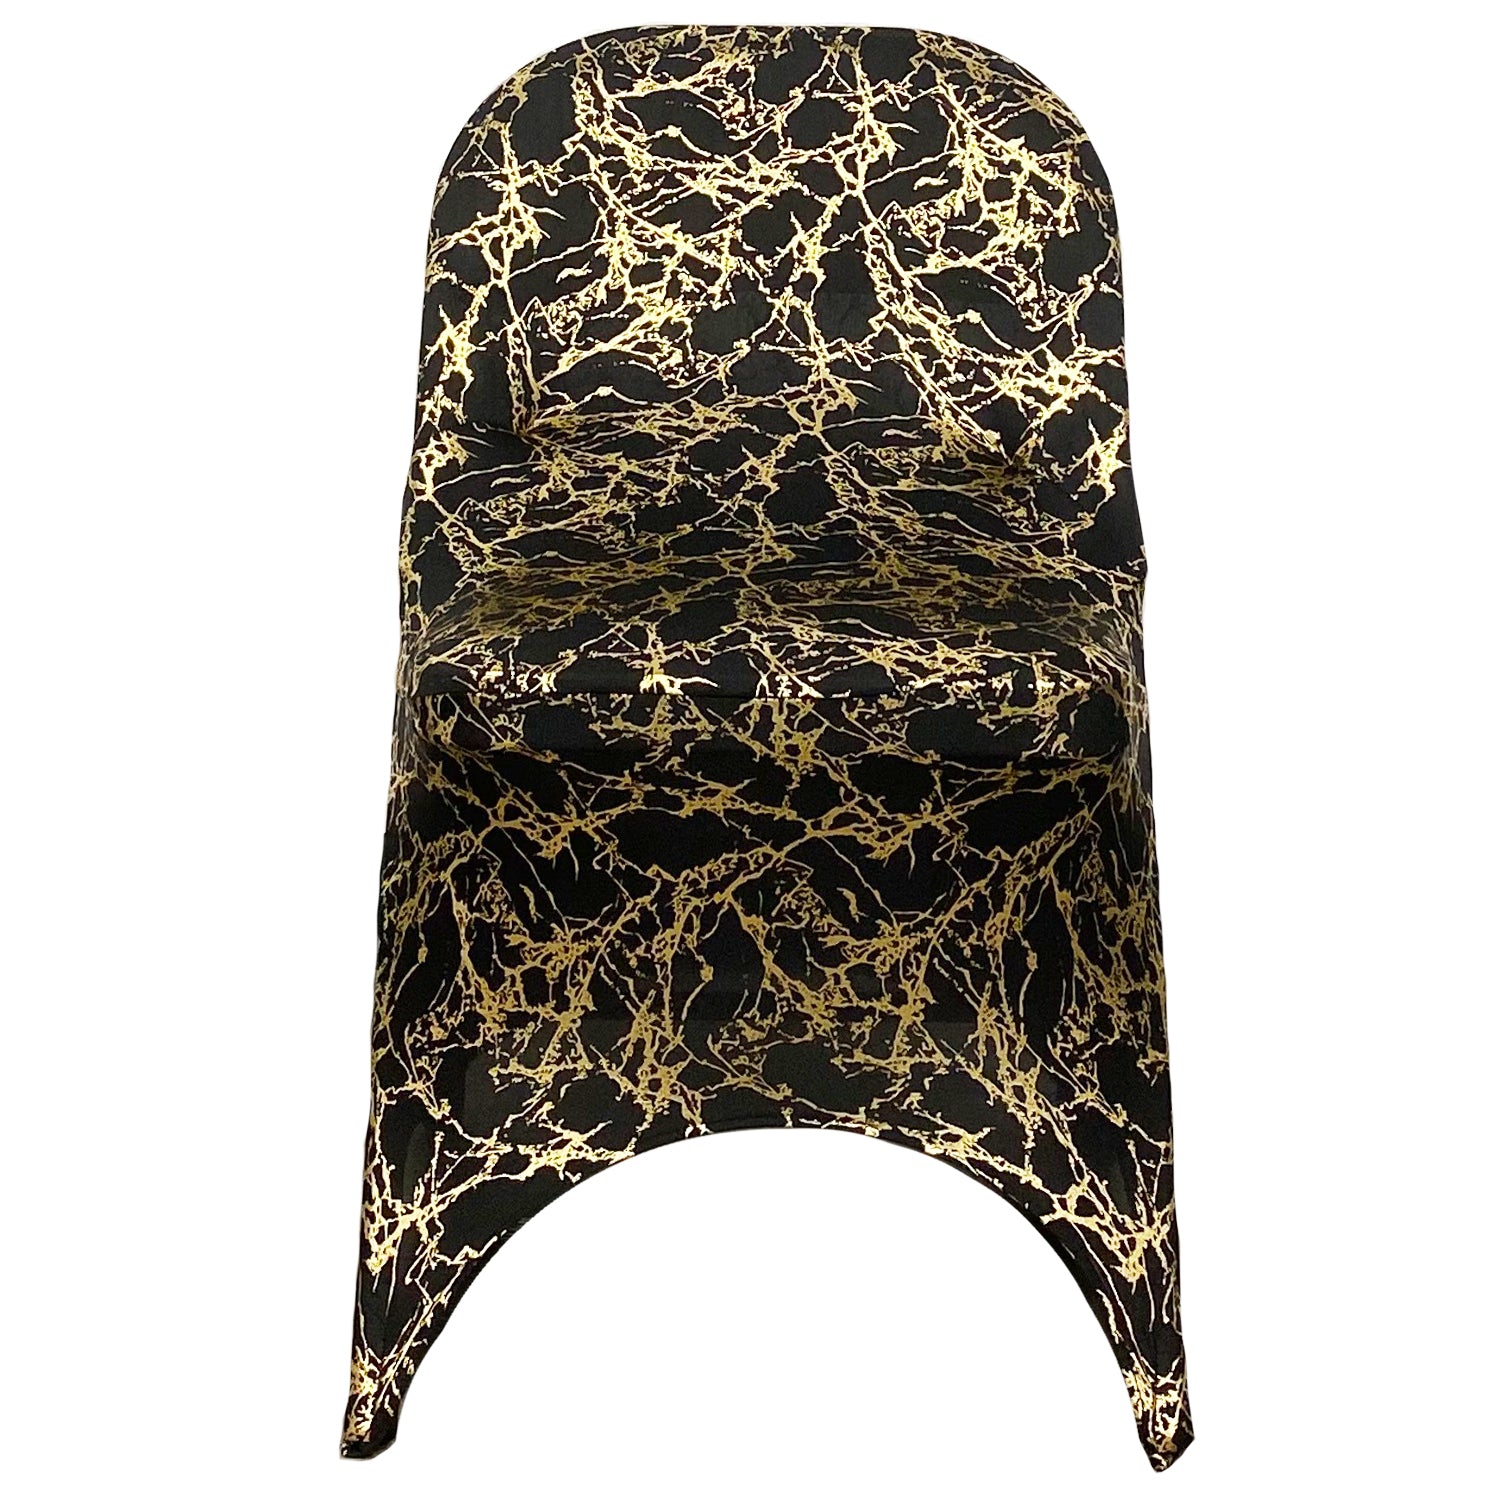 Stretch Spandex Folding Chair Cover Black With Gold Marbling